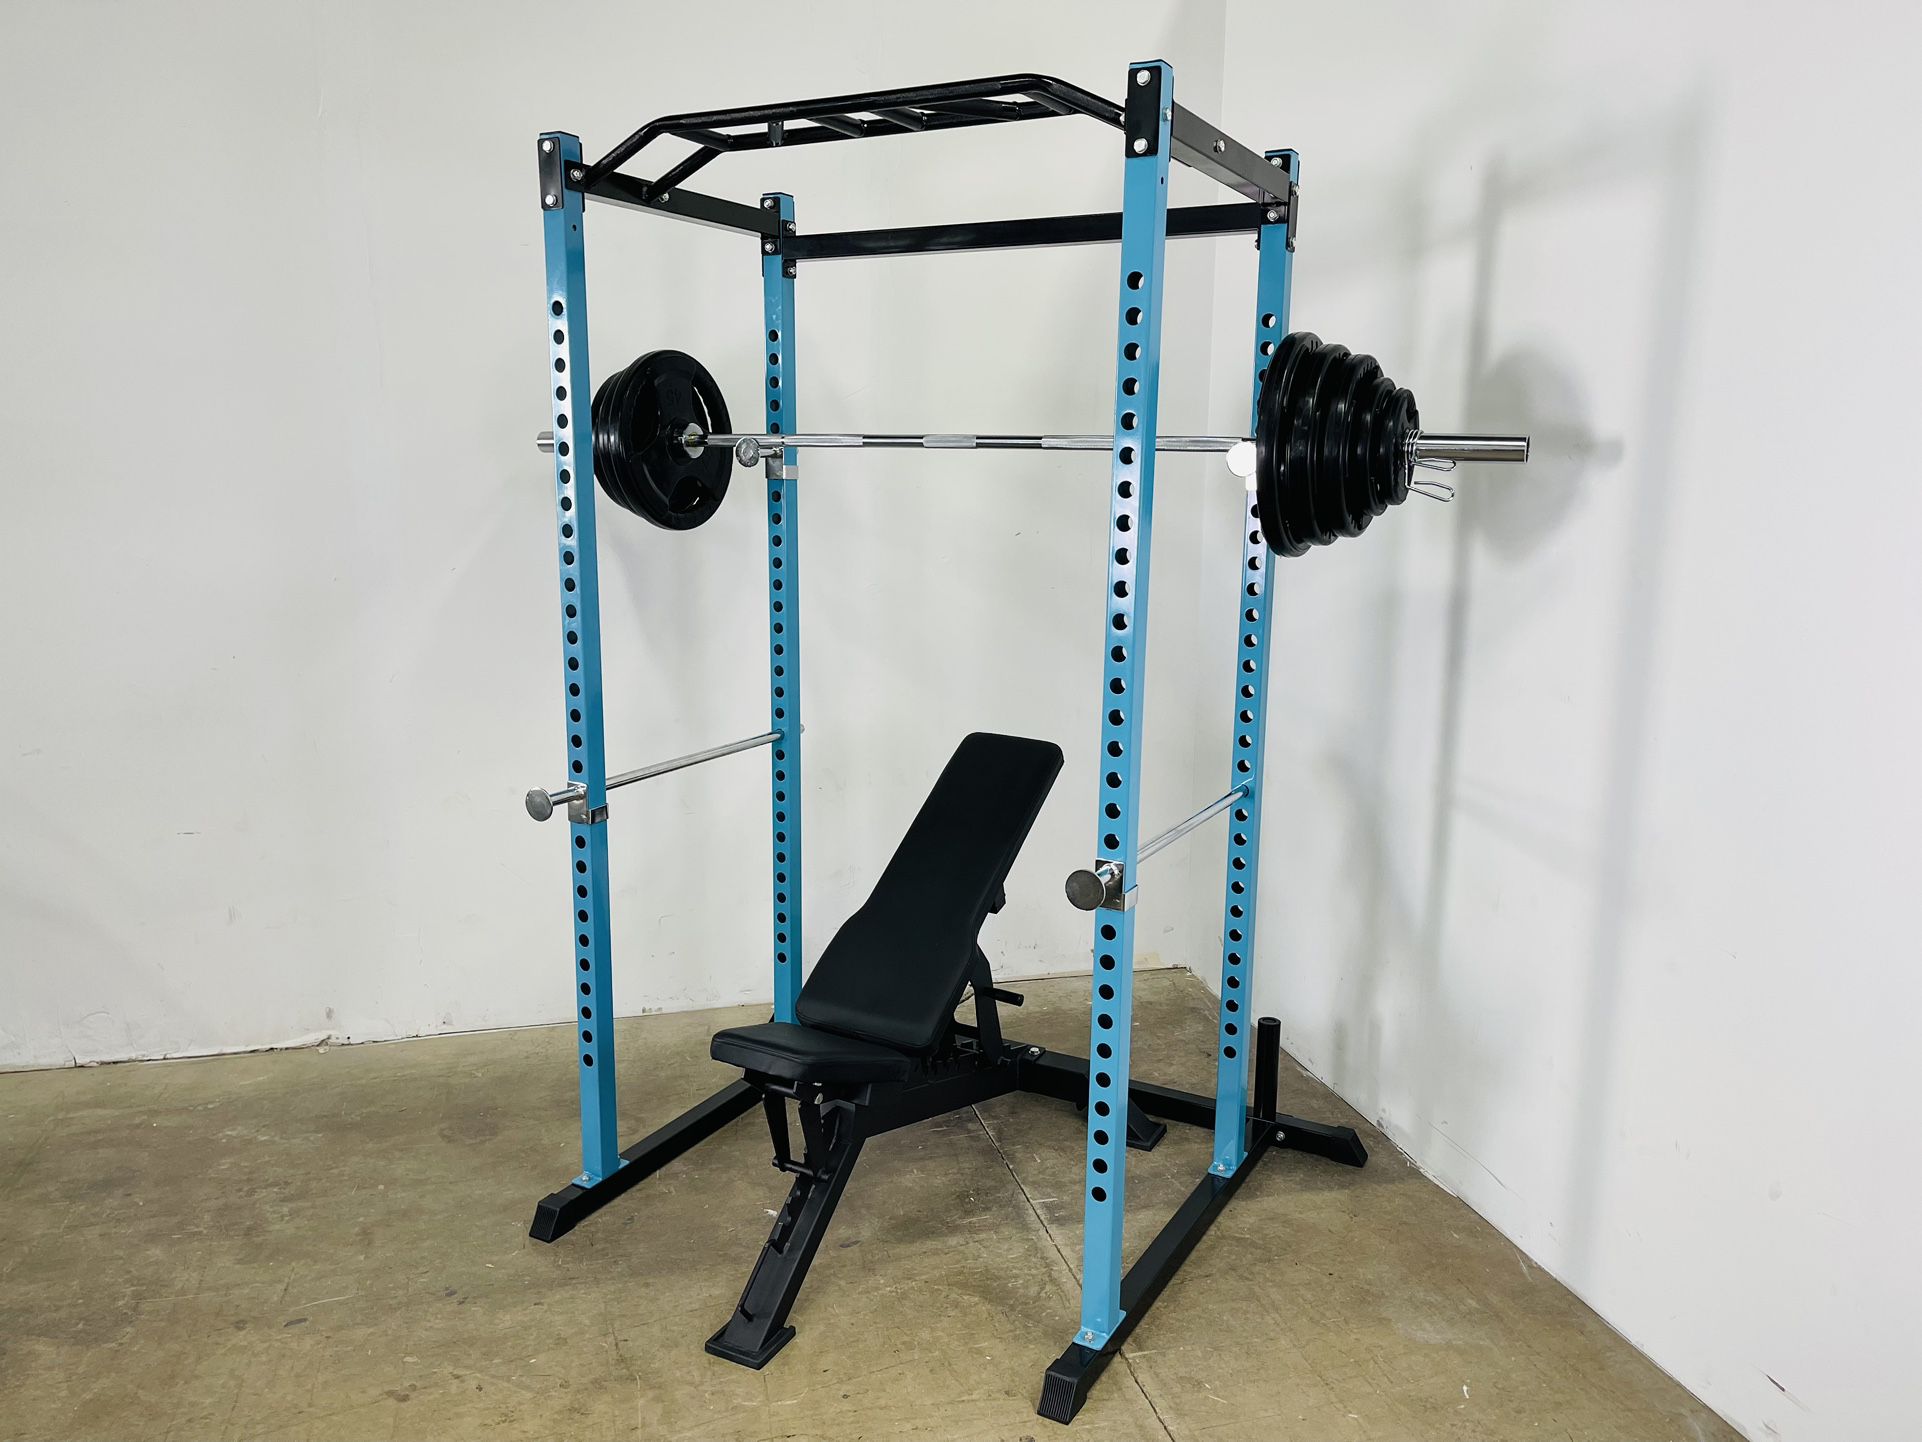 Power Rack - Squat Rack - Bench Press - Olympic Weights - Olympic Bar - Rubberized Weights - Gym